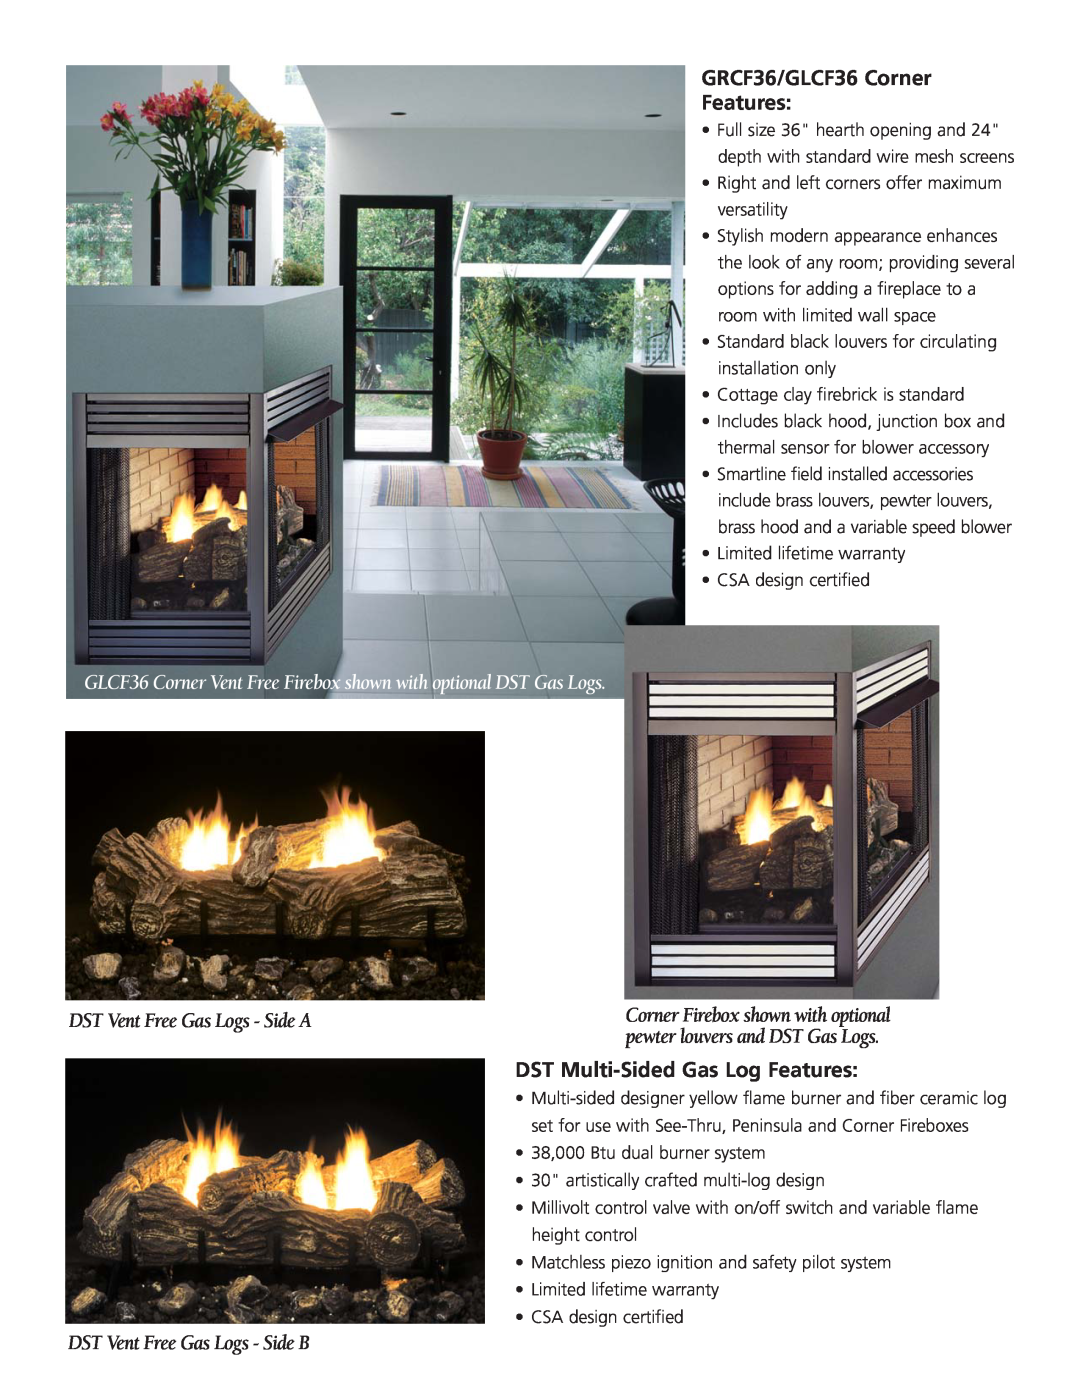 Monessen Hearth GPF36 GRCF36/GLCF36 Corner Features, DST Multi-SidedGas Log Features, DST Vent Free Gas Logs - Side A 